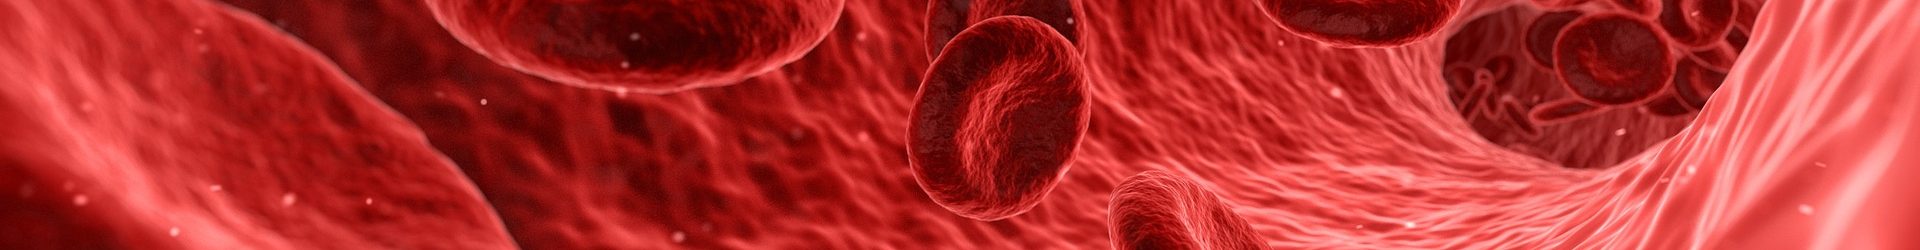 CRISPR Beta-Thalassemia Treatment Approved for Clinical Trial in Europe